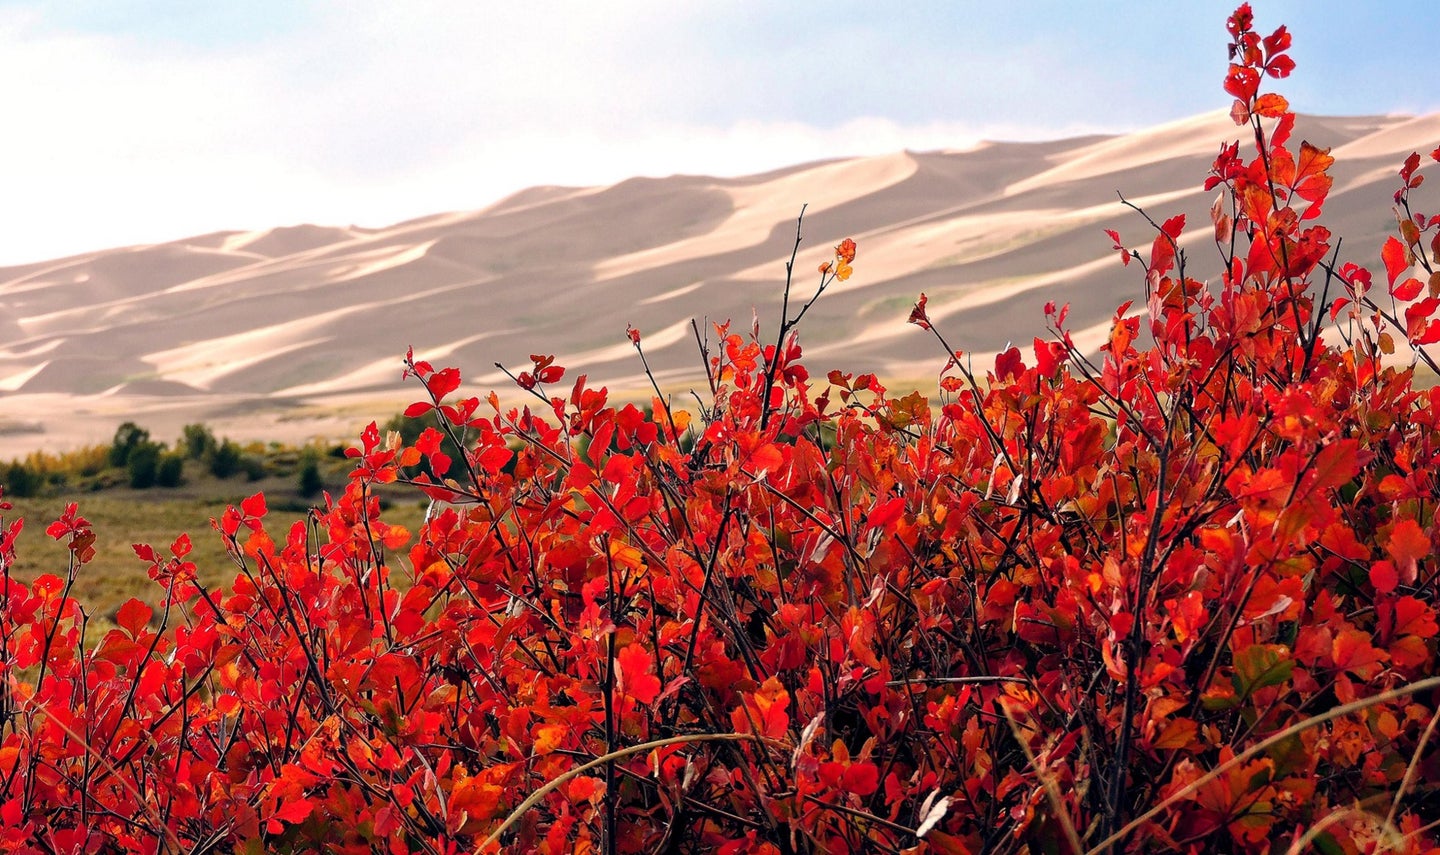 Red fall foliage on three-leaf sumac in Great Sand Dunes National Park